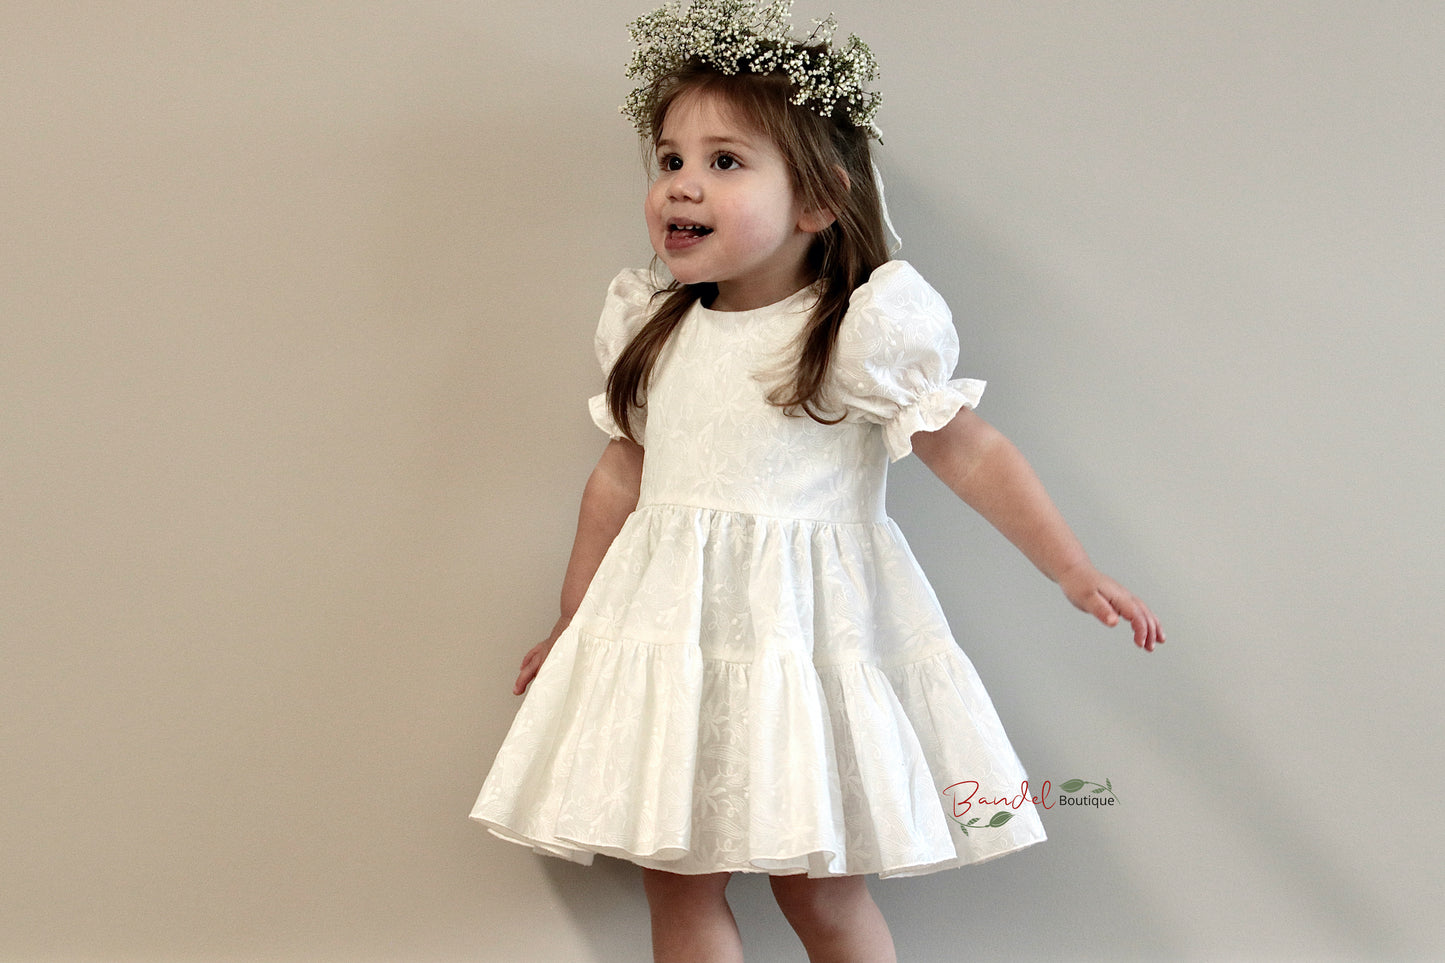 This Embroidery Ivory Dress is perfect for your little girl. Crafted from cotton fabric, it features a Simple bodice, Short puff sleeve, and a Two tiered gathered skirt with top tier being a gathered circle skirt. Secure it with the button back closure and your little girl is set to slay any occasion.